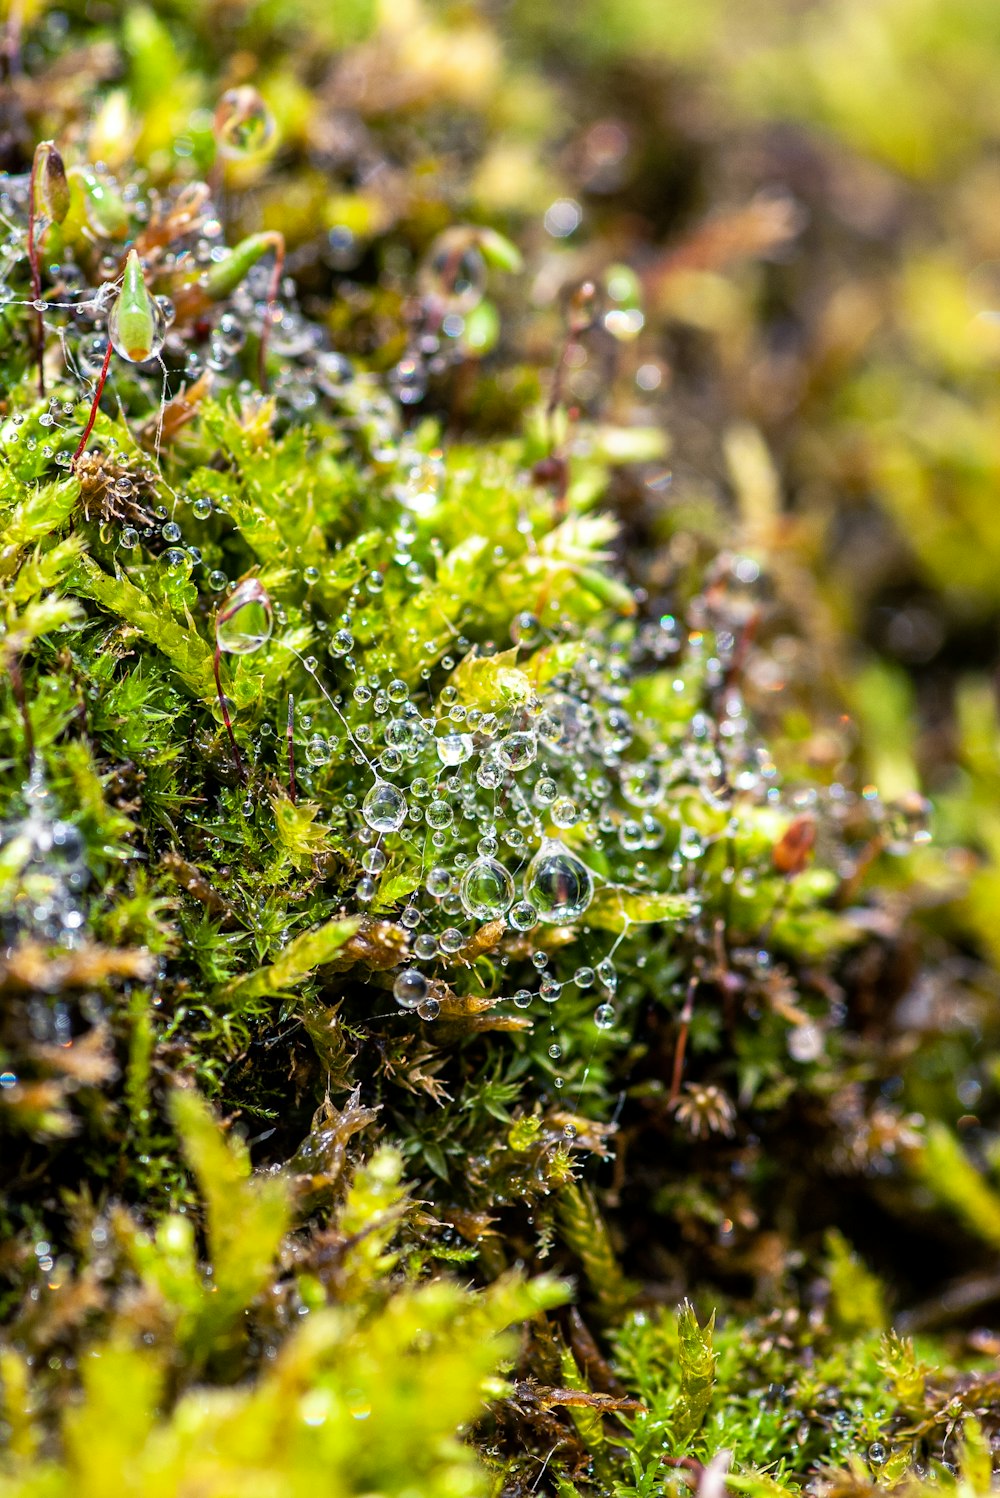 a close up of a mossy surface with drops of water on it